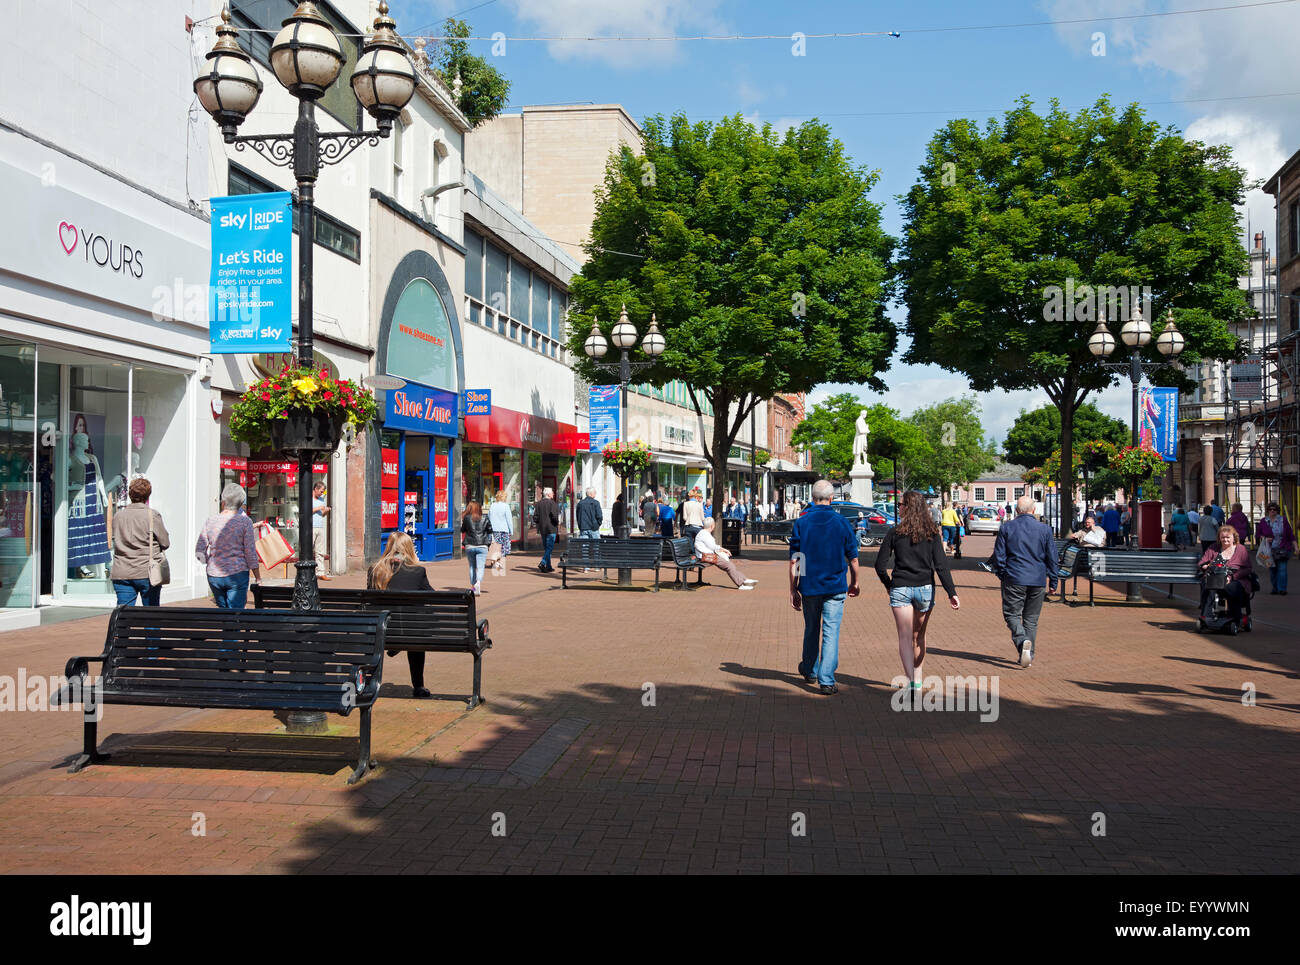 People visitors tourists walking around the shops shopping stores town centre in summer Carlisle Cumbria England UK United Kingdom GB Great Britain Stock Photo